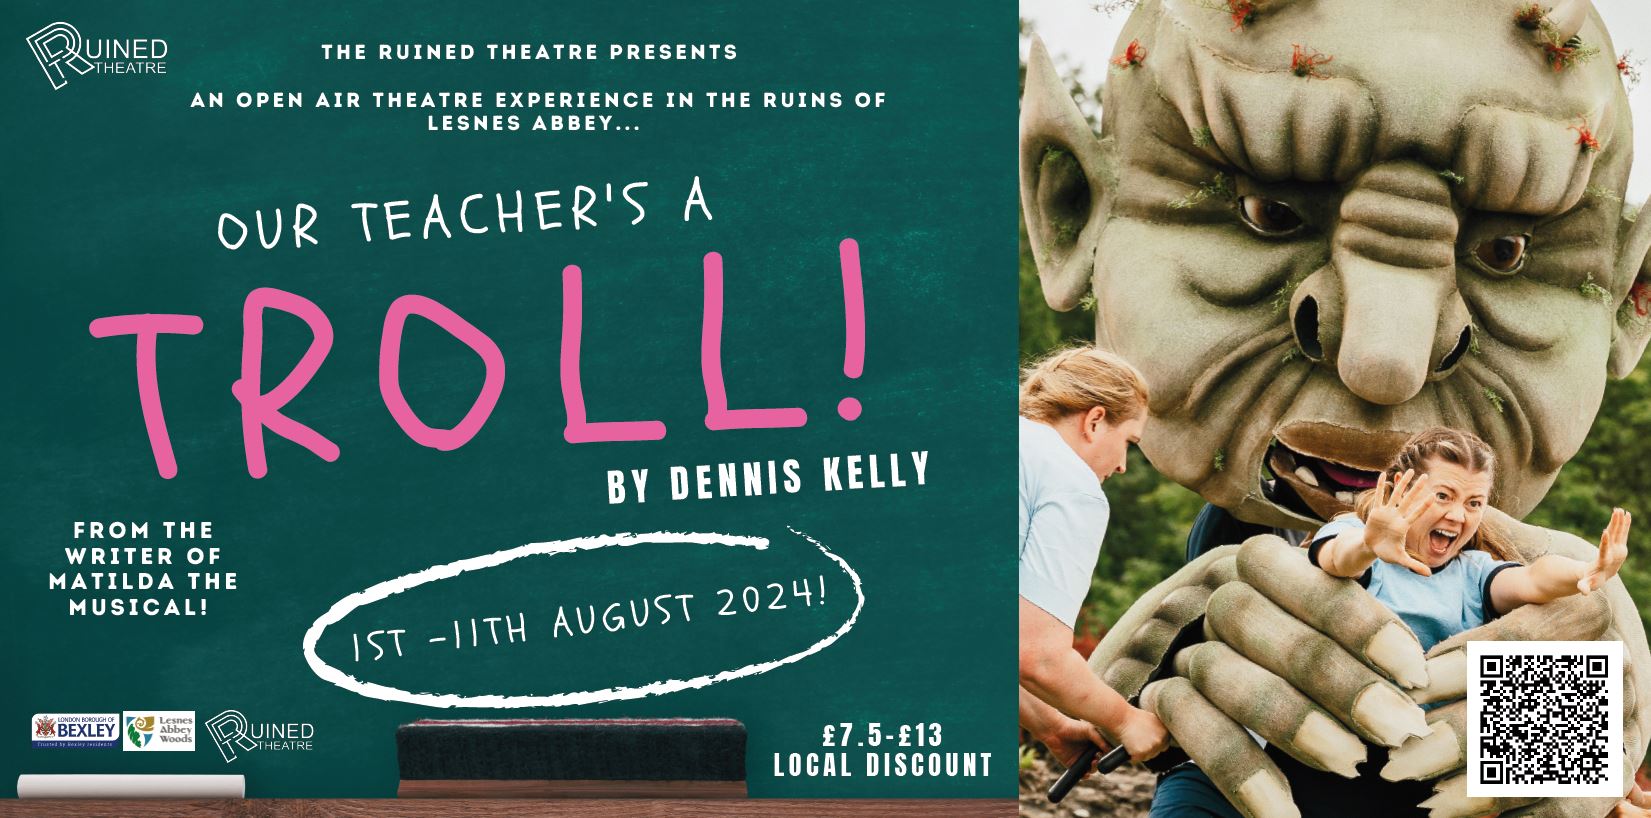 Poster advertising a play Our Teachers is a Troll